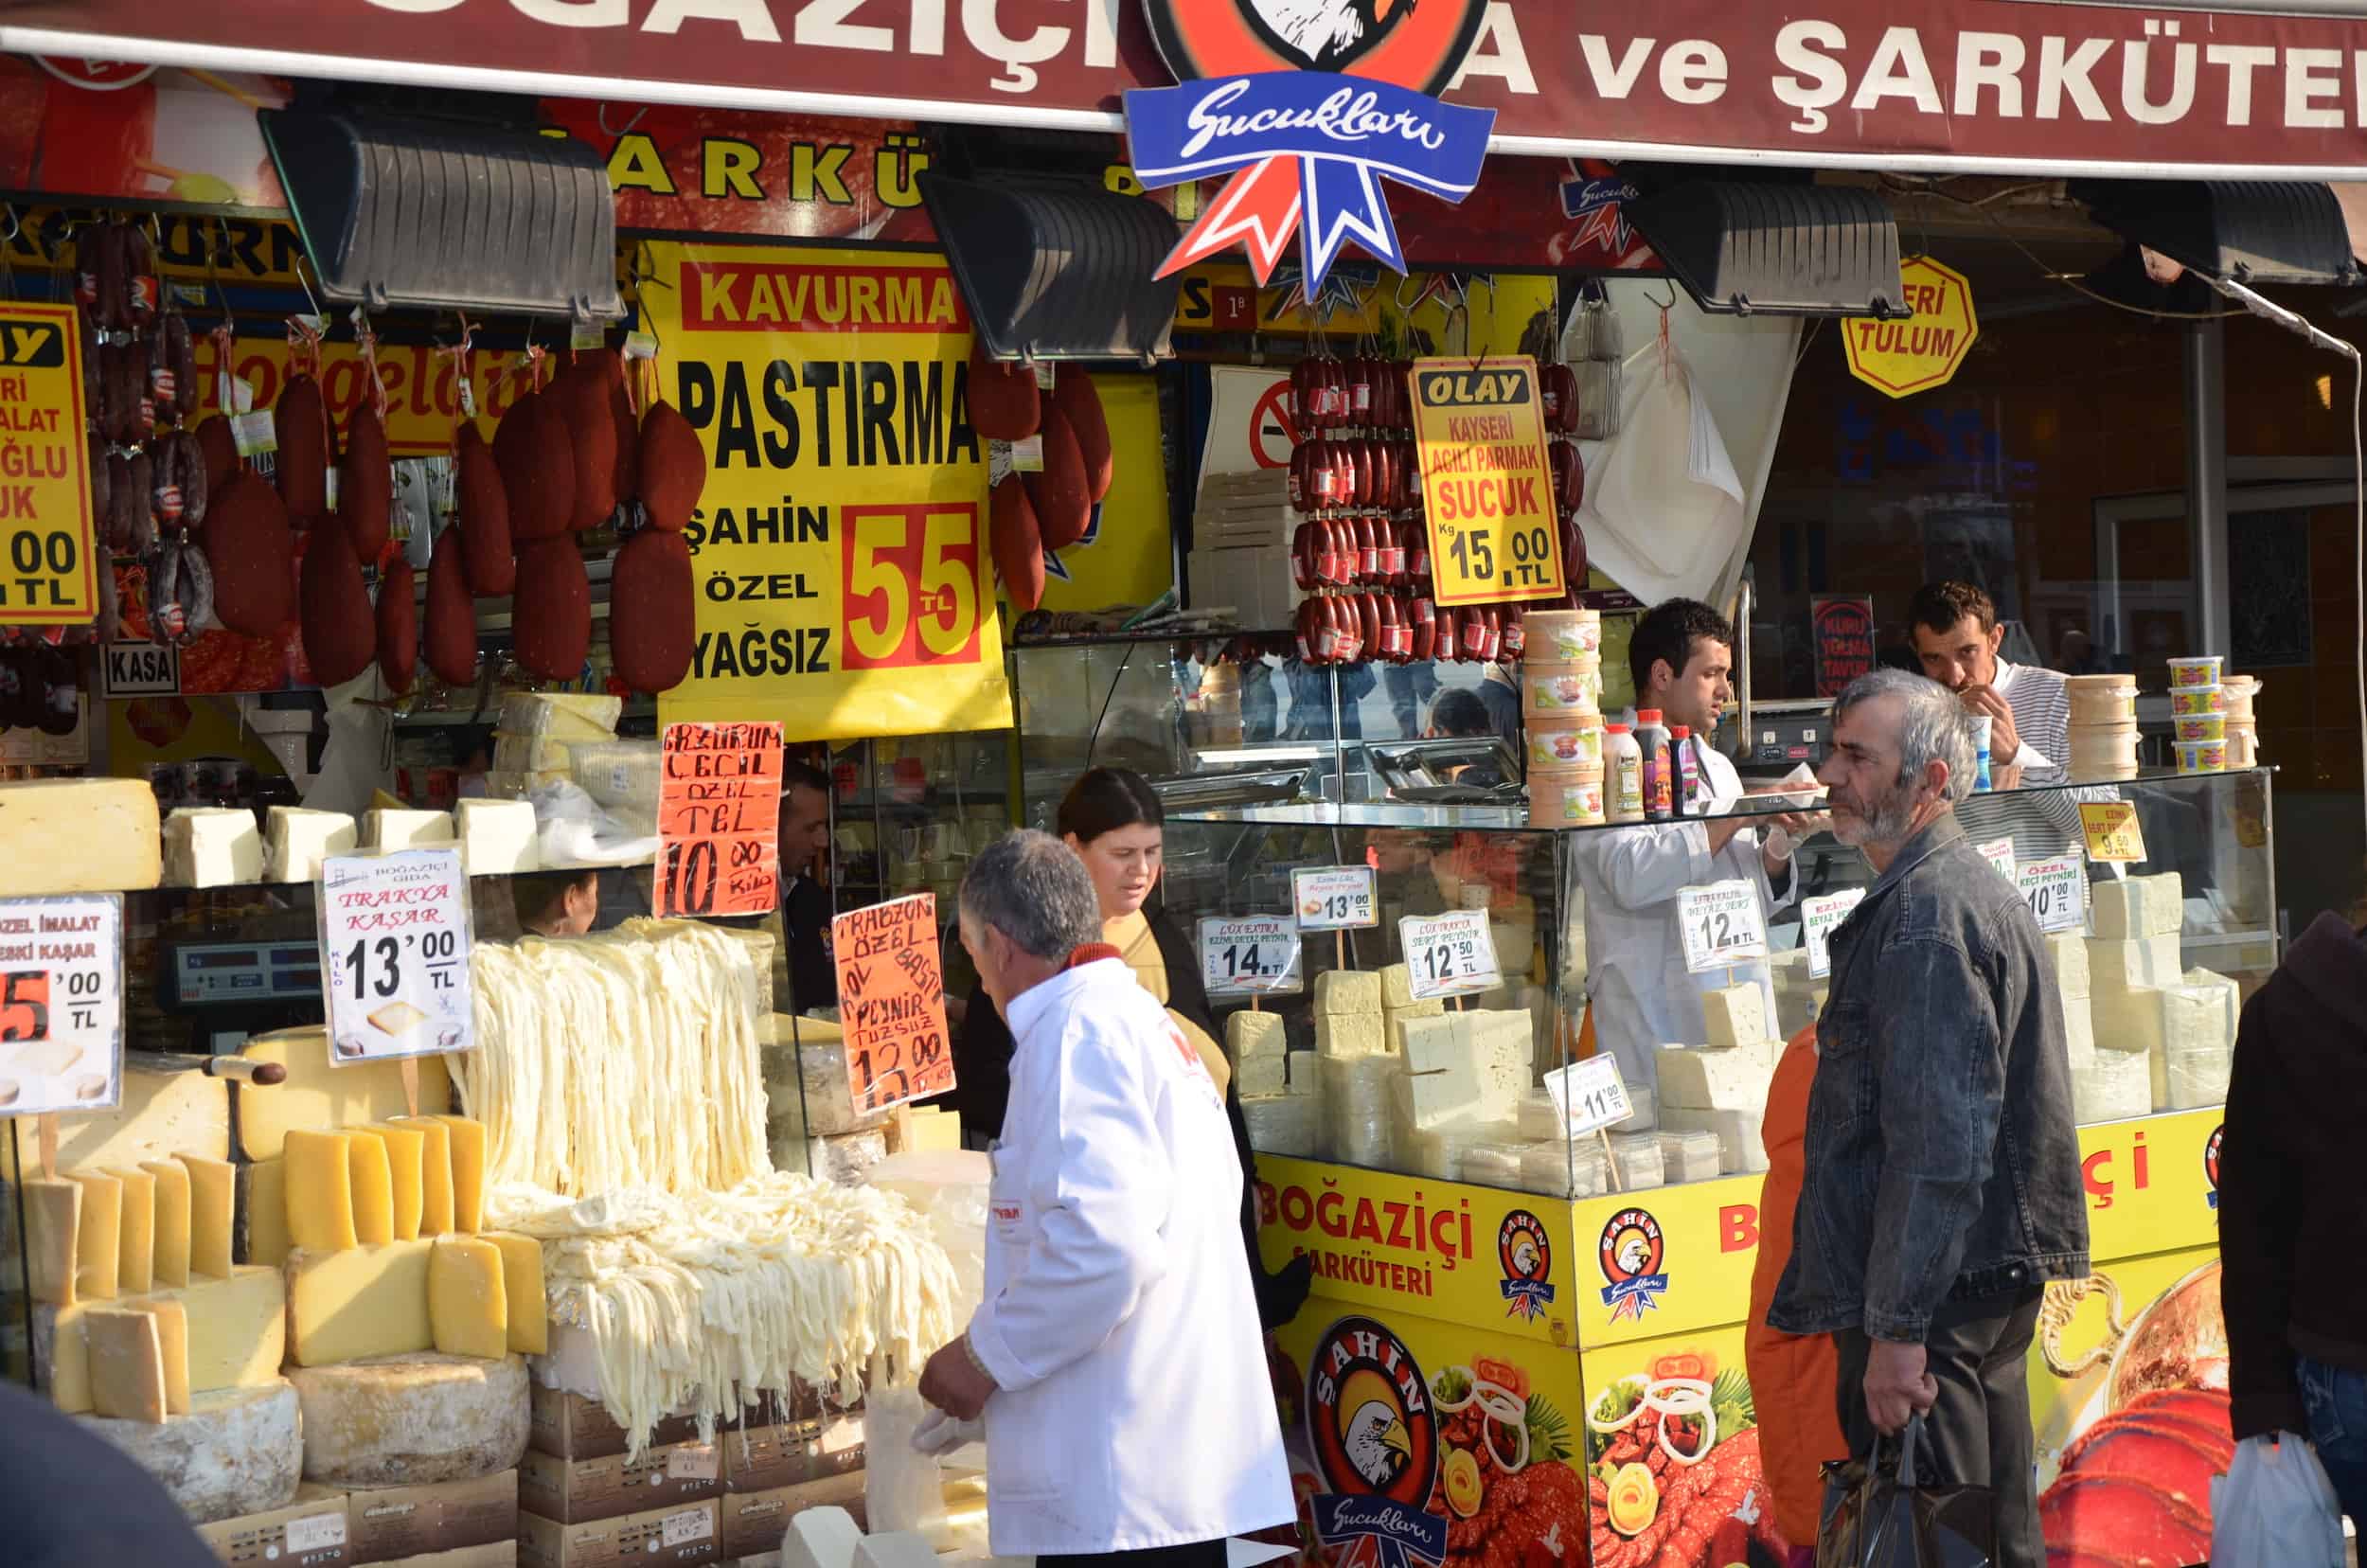 Meats and cheese at the Spice Bazaar in Istanbul, Turkey